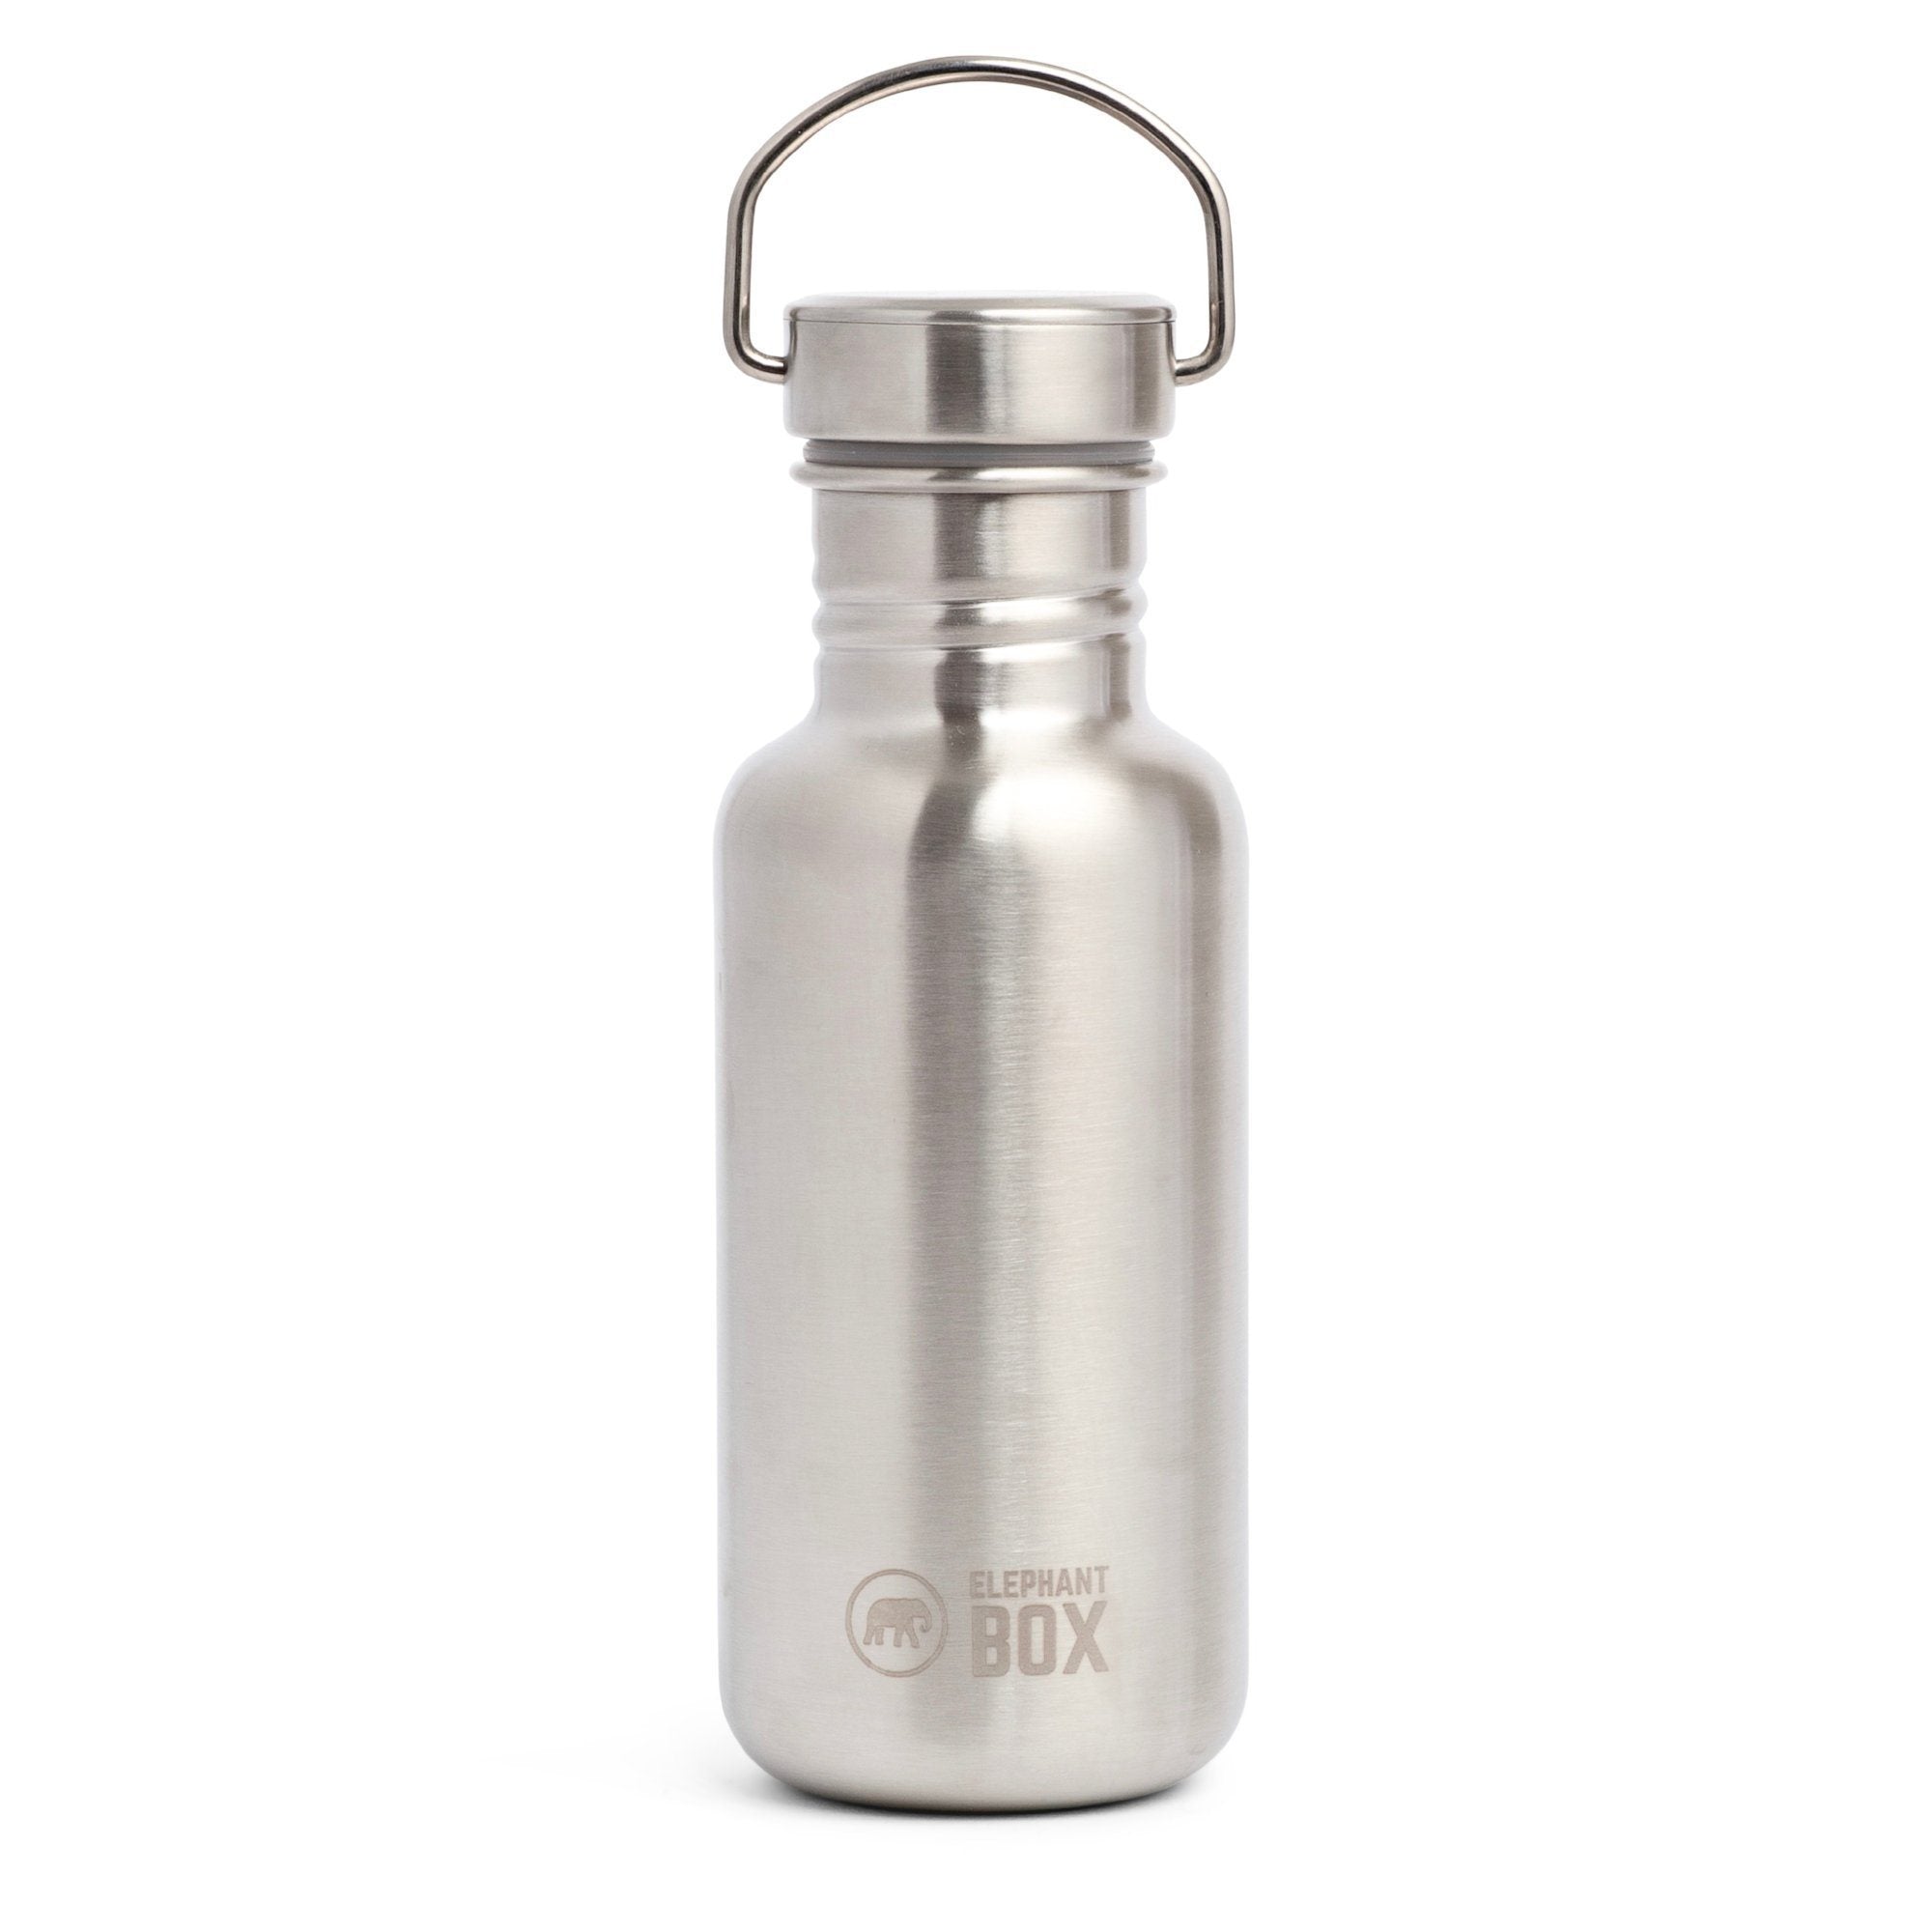 Small single Wall Water Bottle Elephant Box - 100% Stainless Steel Bottle with  lid and carry loop